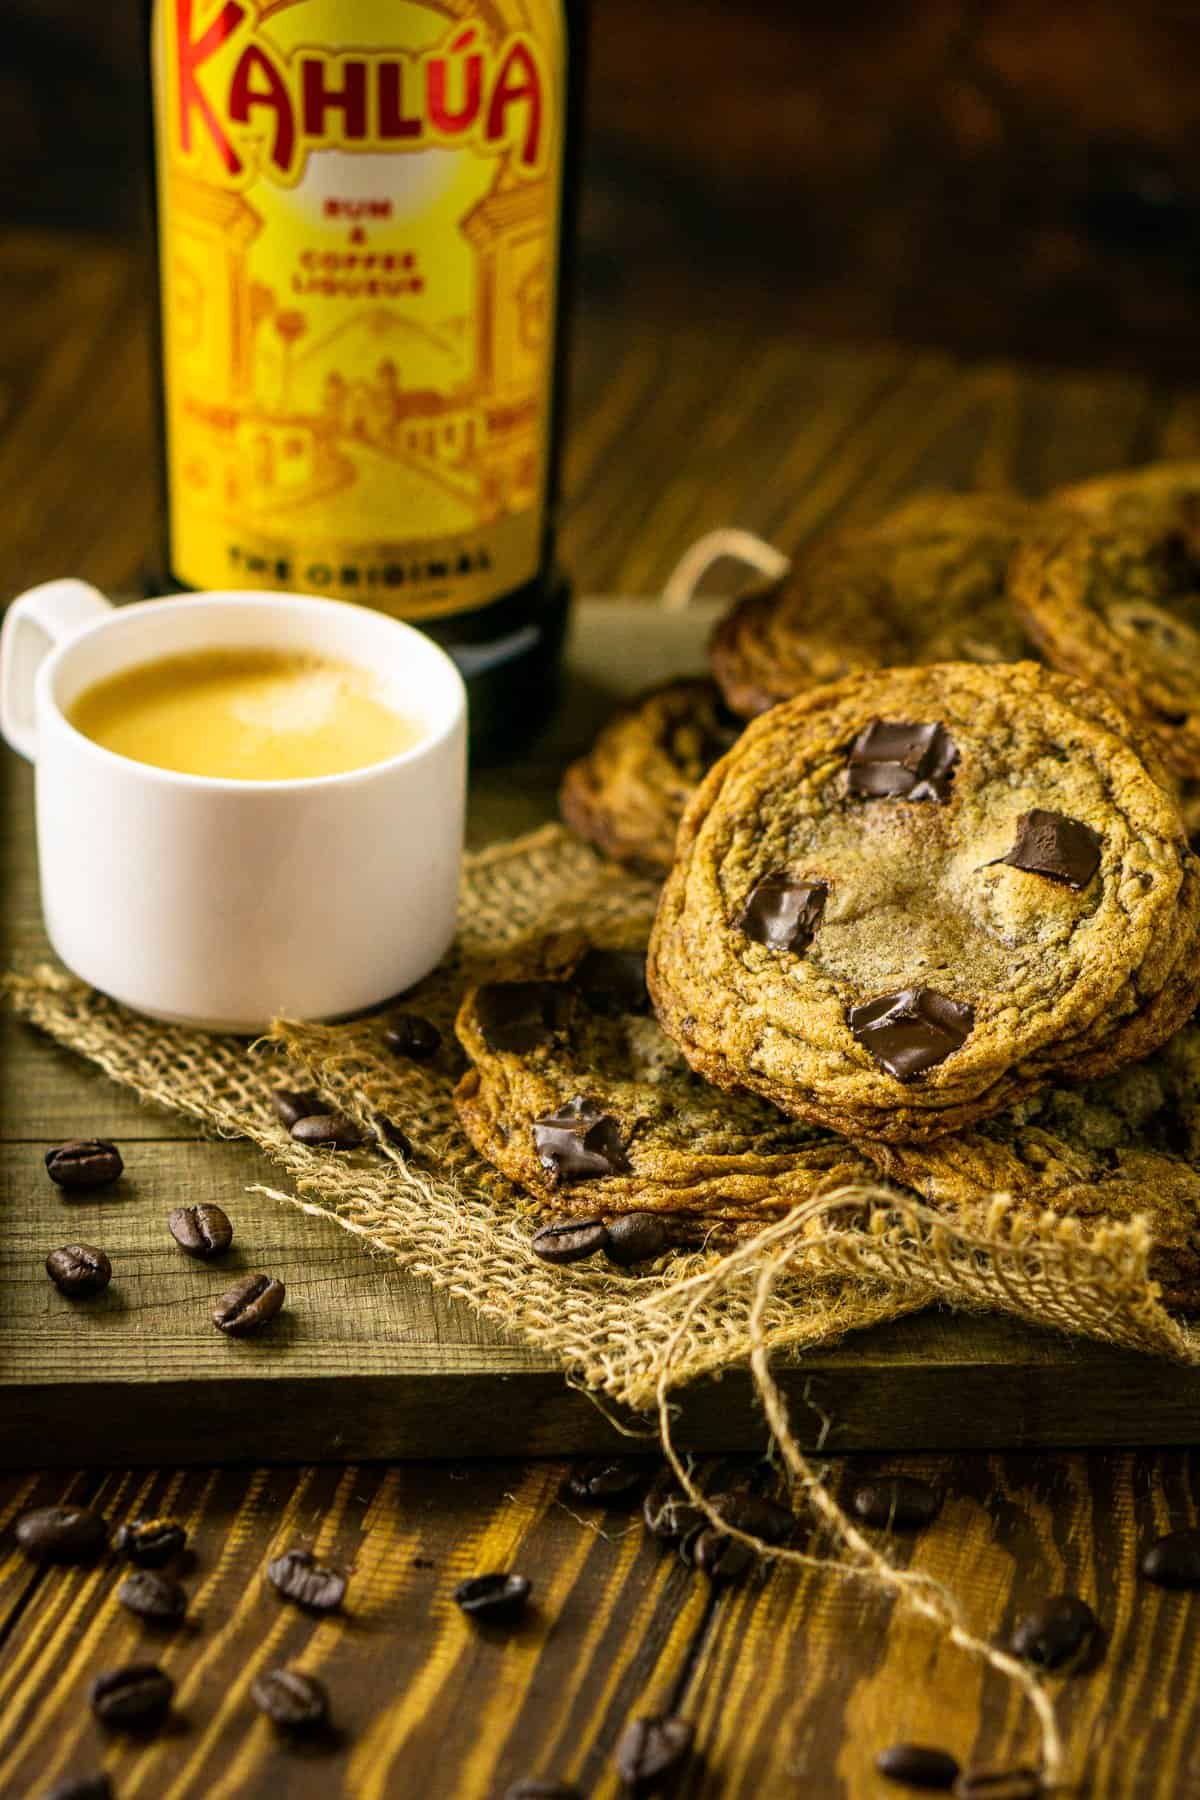 The espresso and Kahlua cookies on a wooden tray with burlap.